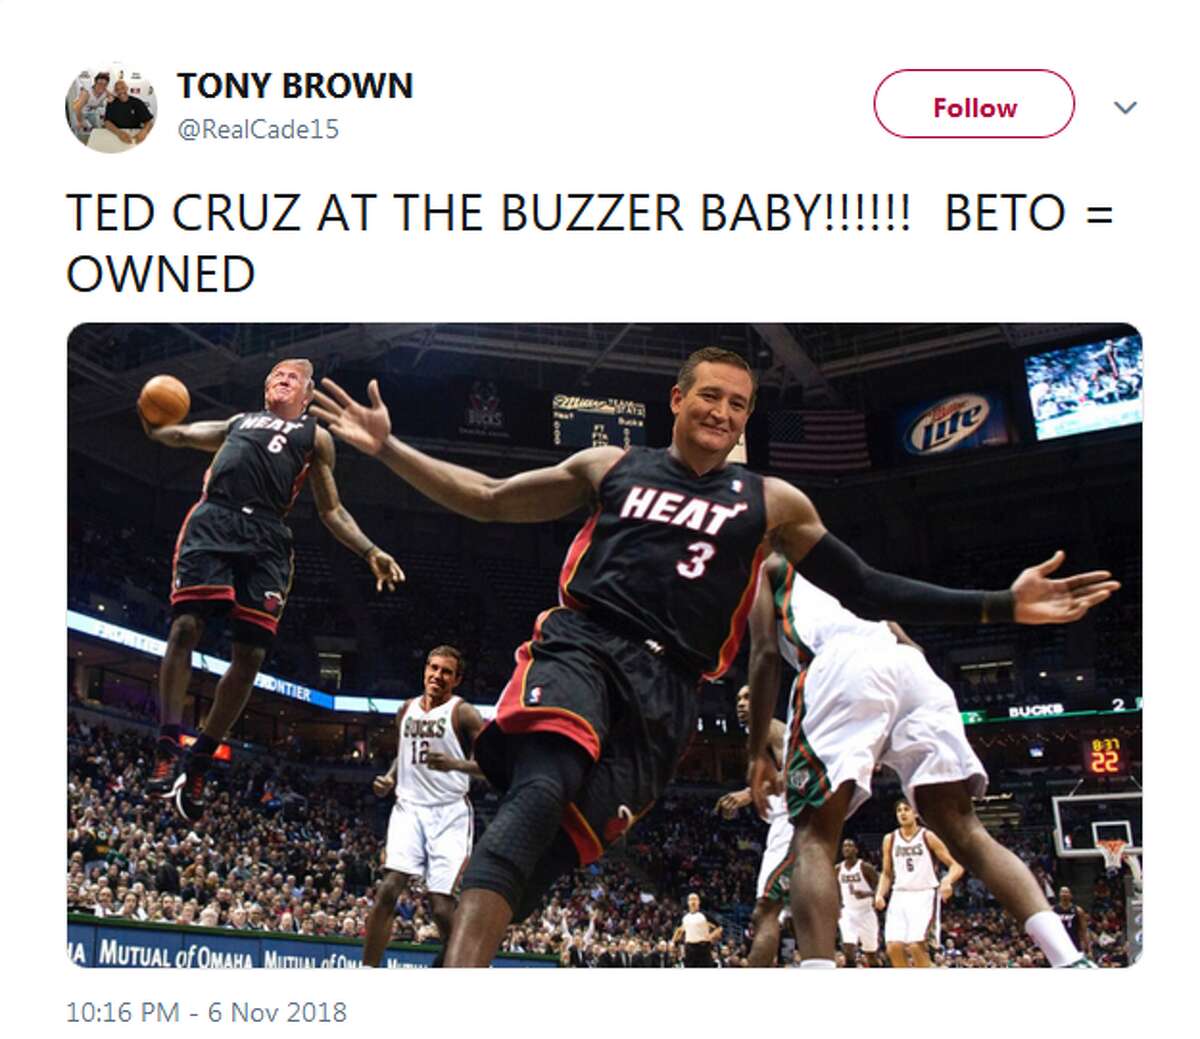 @RealCade15: TED CRUZ AT THE BUZZER BABY!!!!!! BETO = OWNED